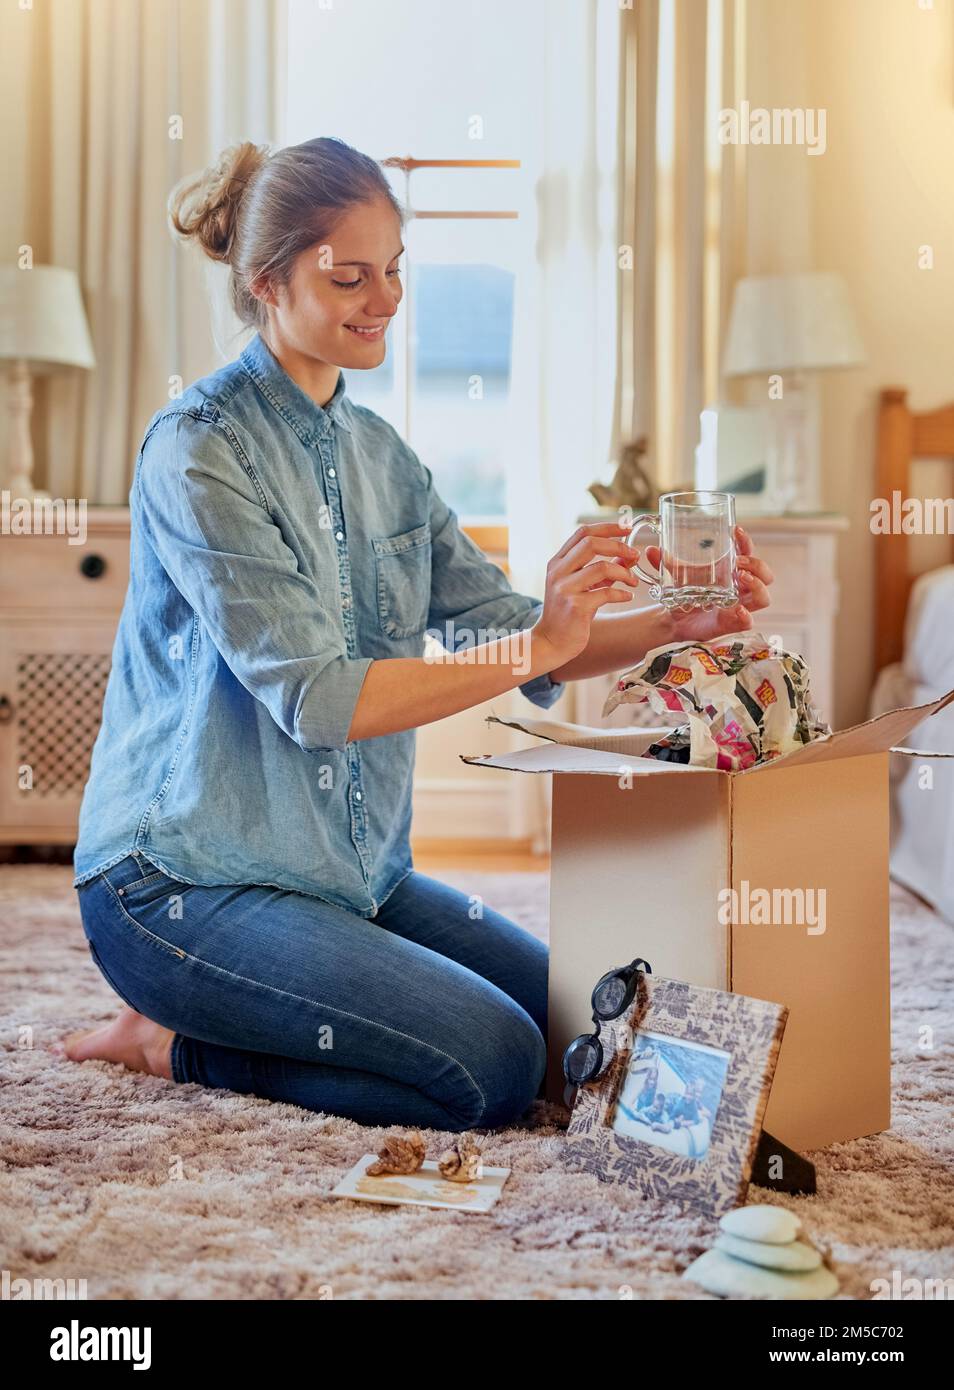 Taking a trip down memory lane. a young woman unpacking a box at home. Stock Photo